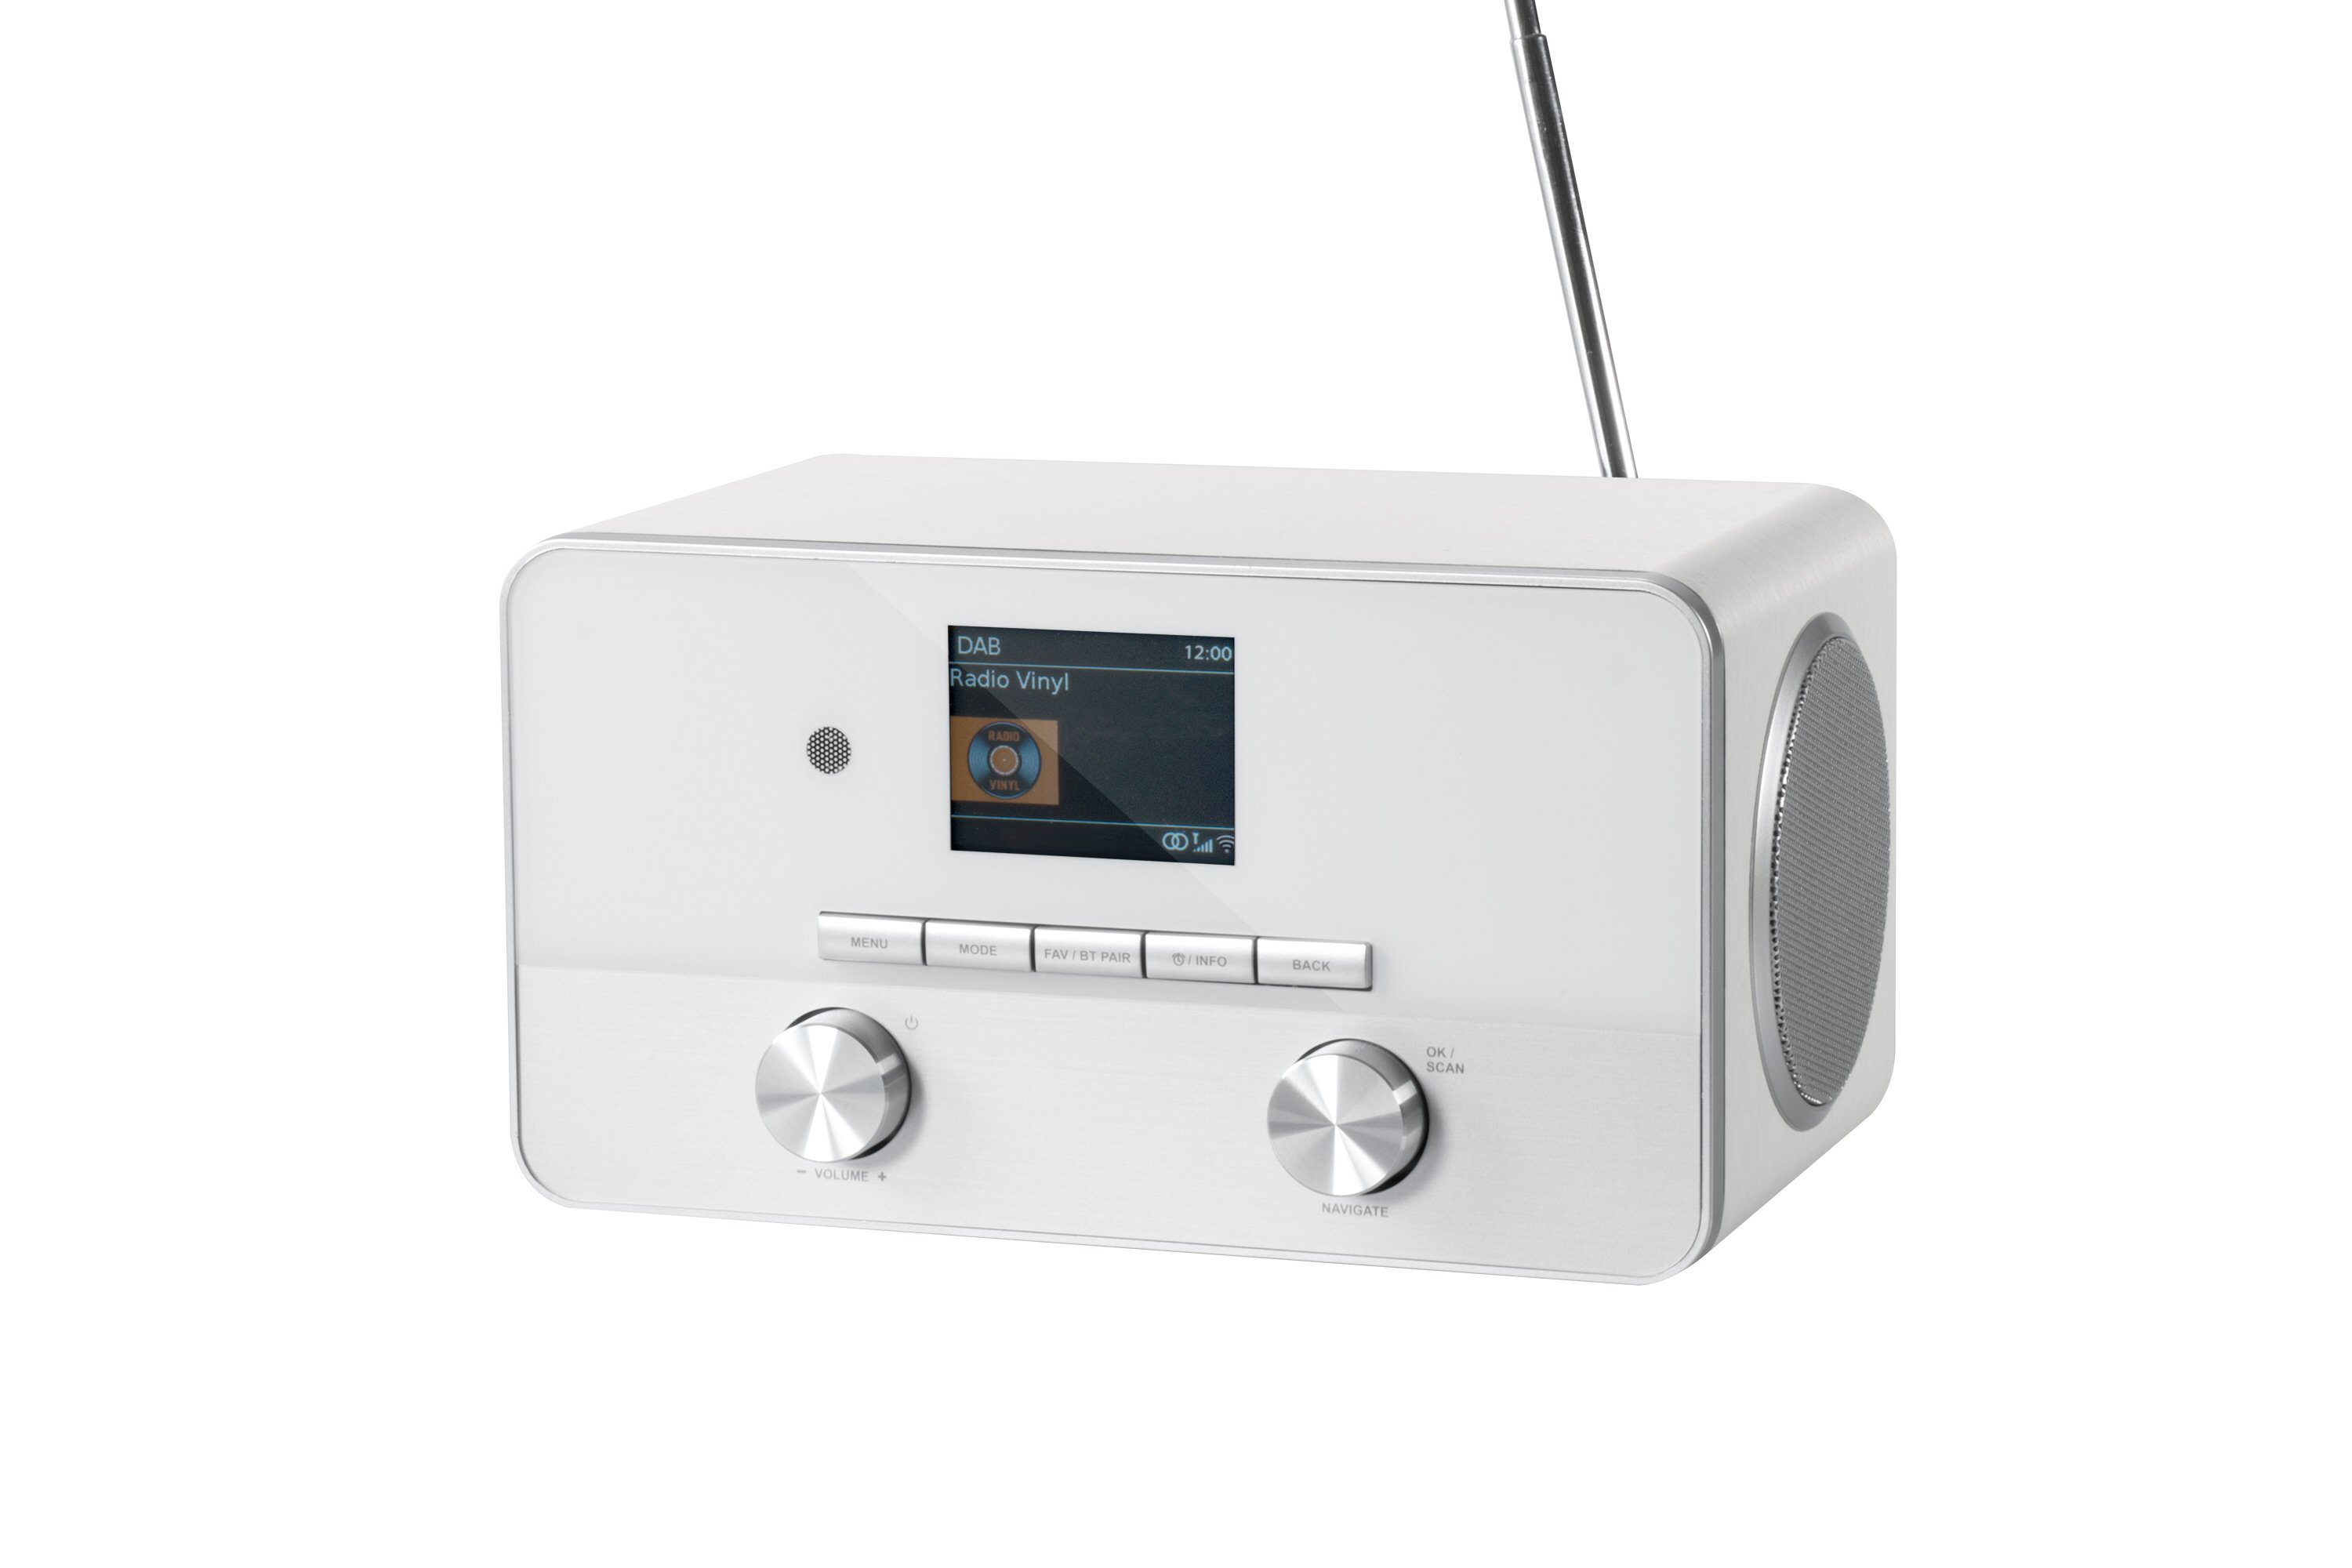 1696 All-in-1 WiFi stereo radio